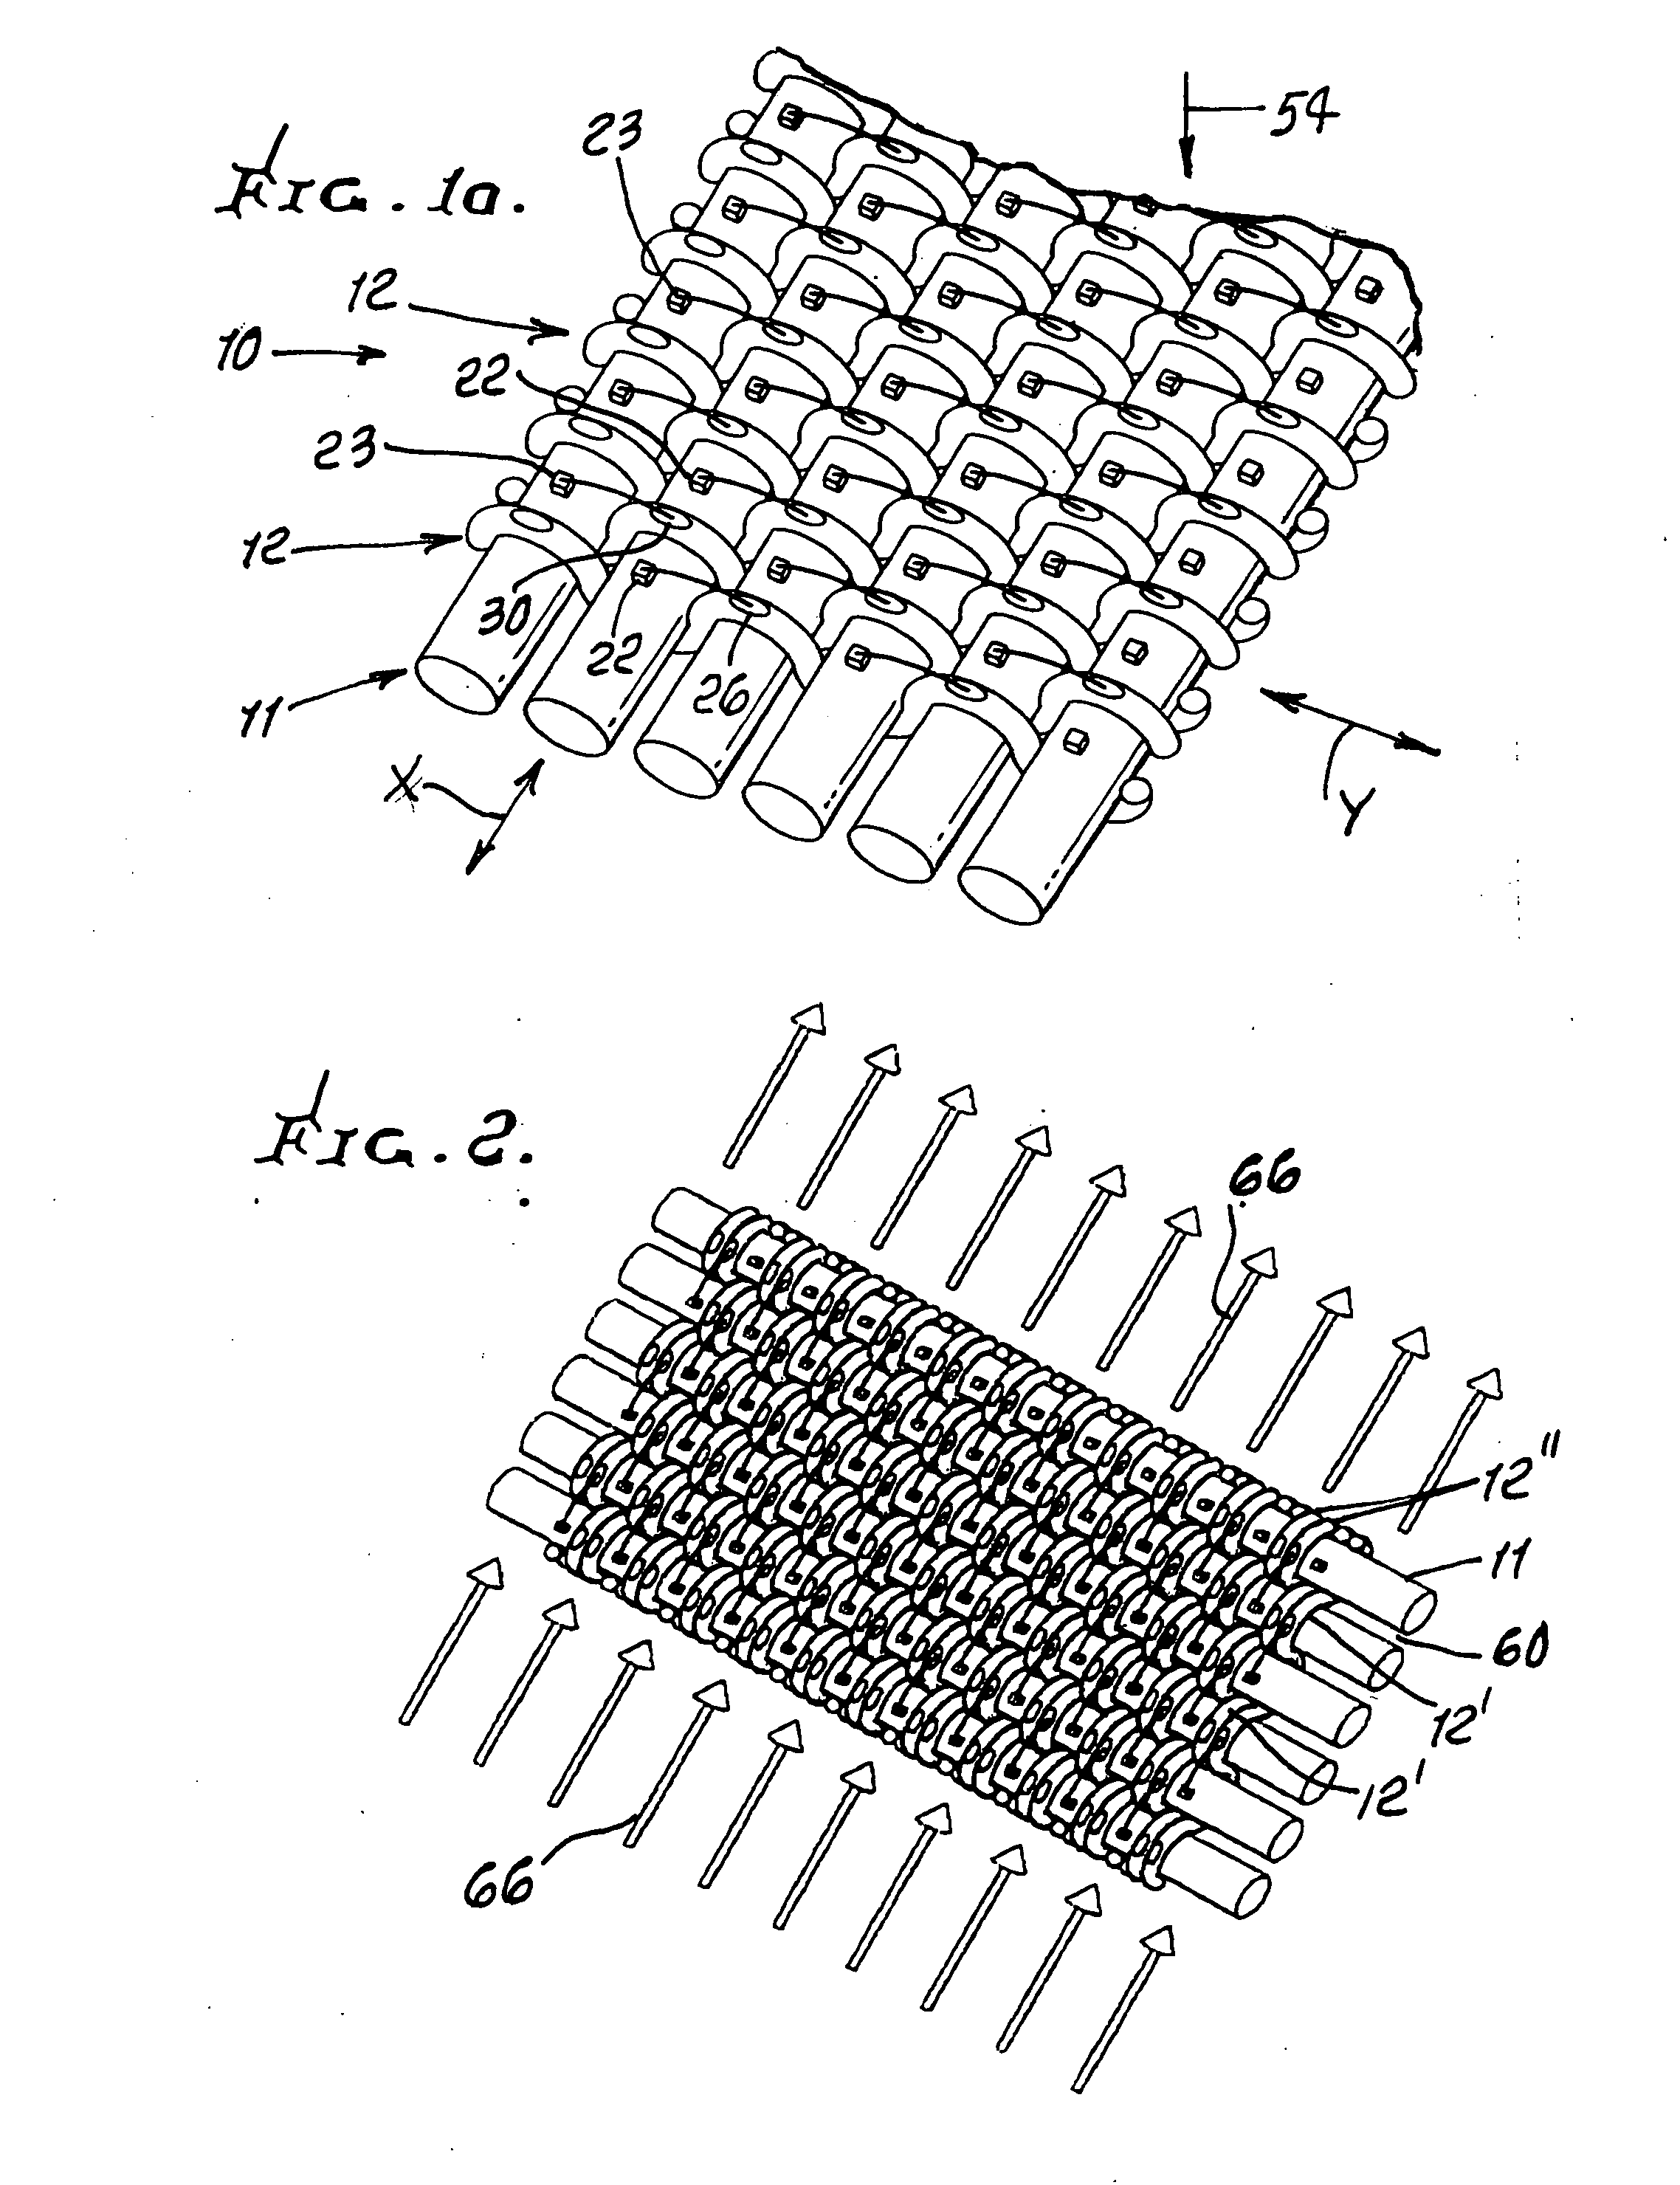 Electronic assembly/system with reduced cost, mass, and volume and increased efficiency and power density